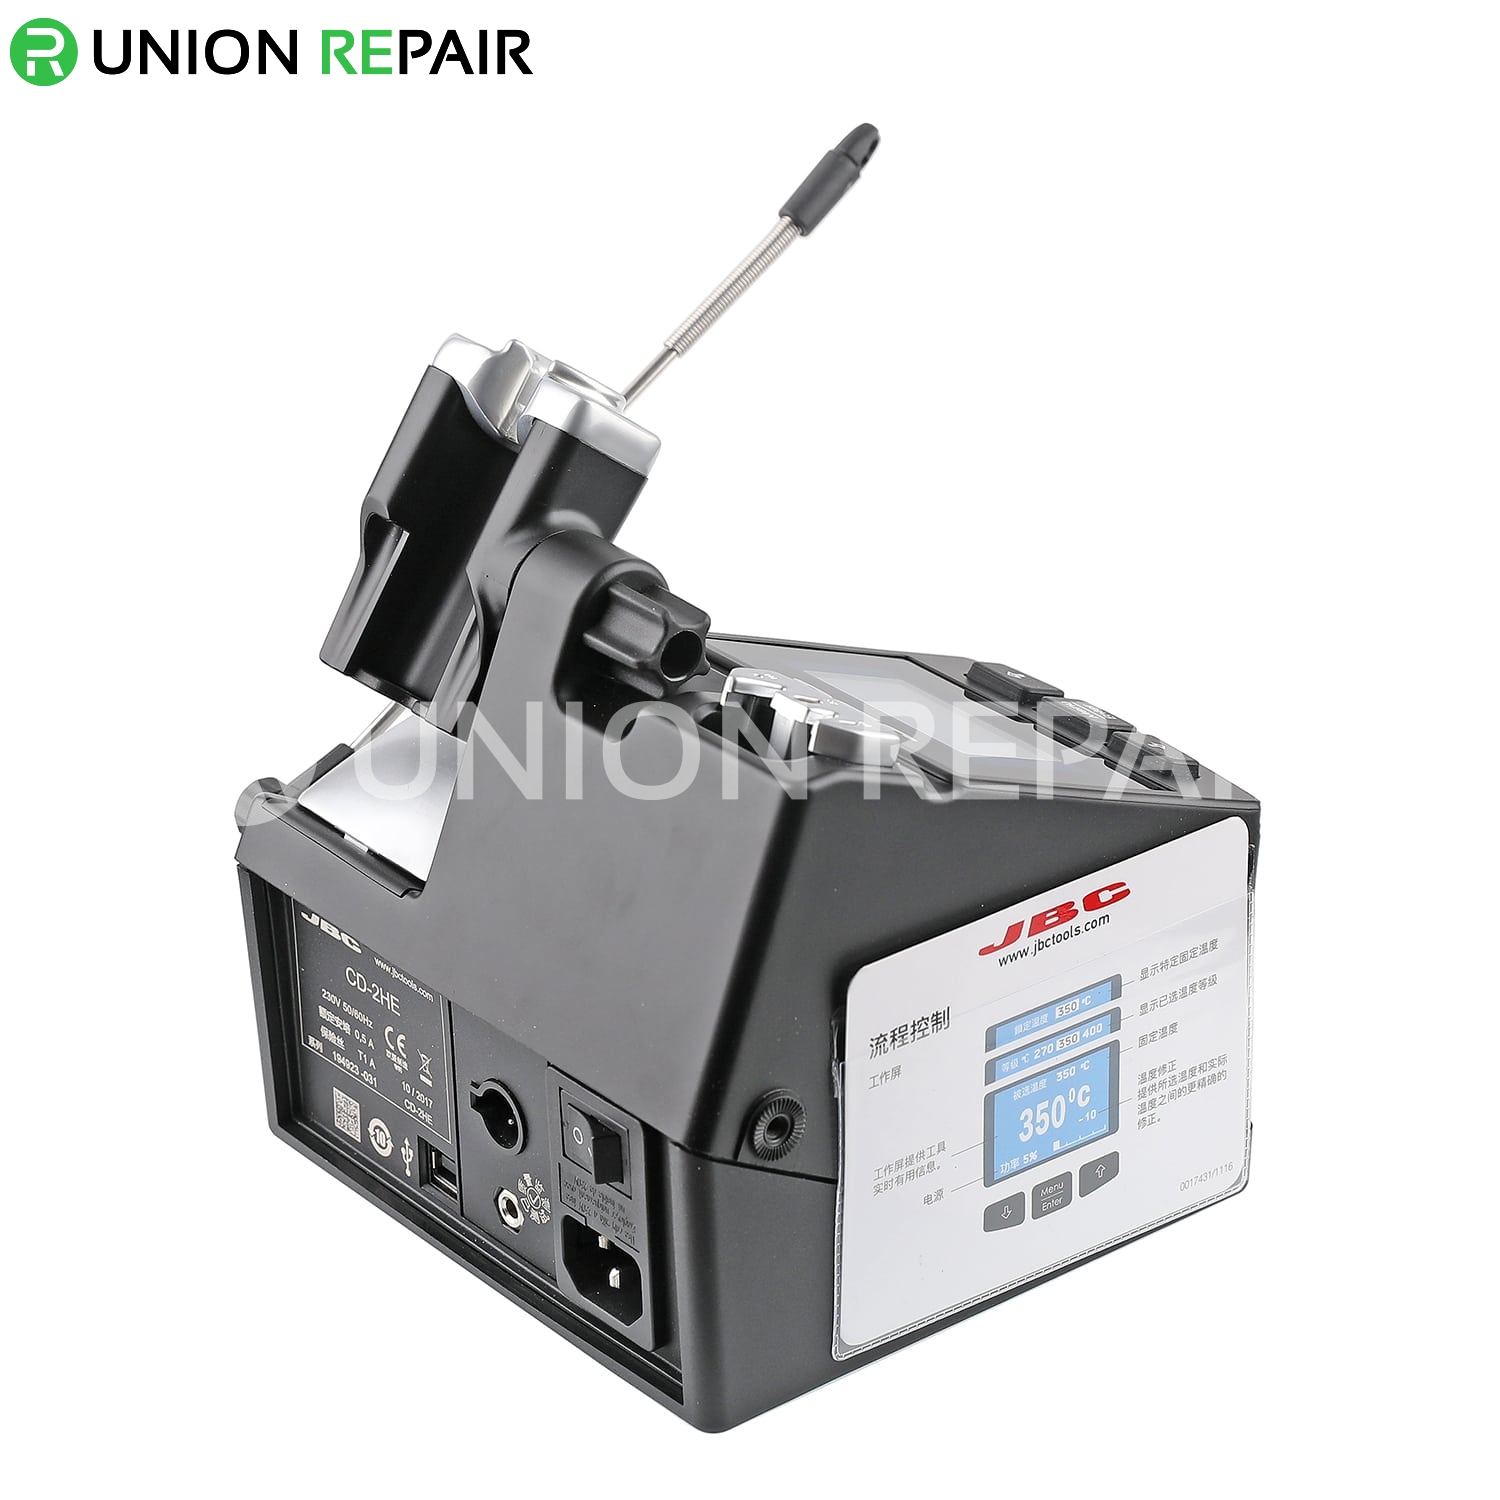 JBC CD-2SHE with T210-A Handle Precision Soldering Station